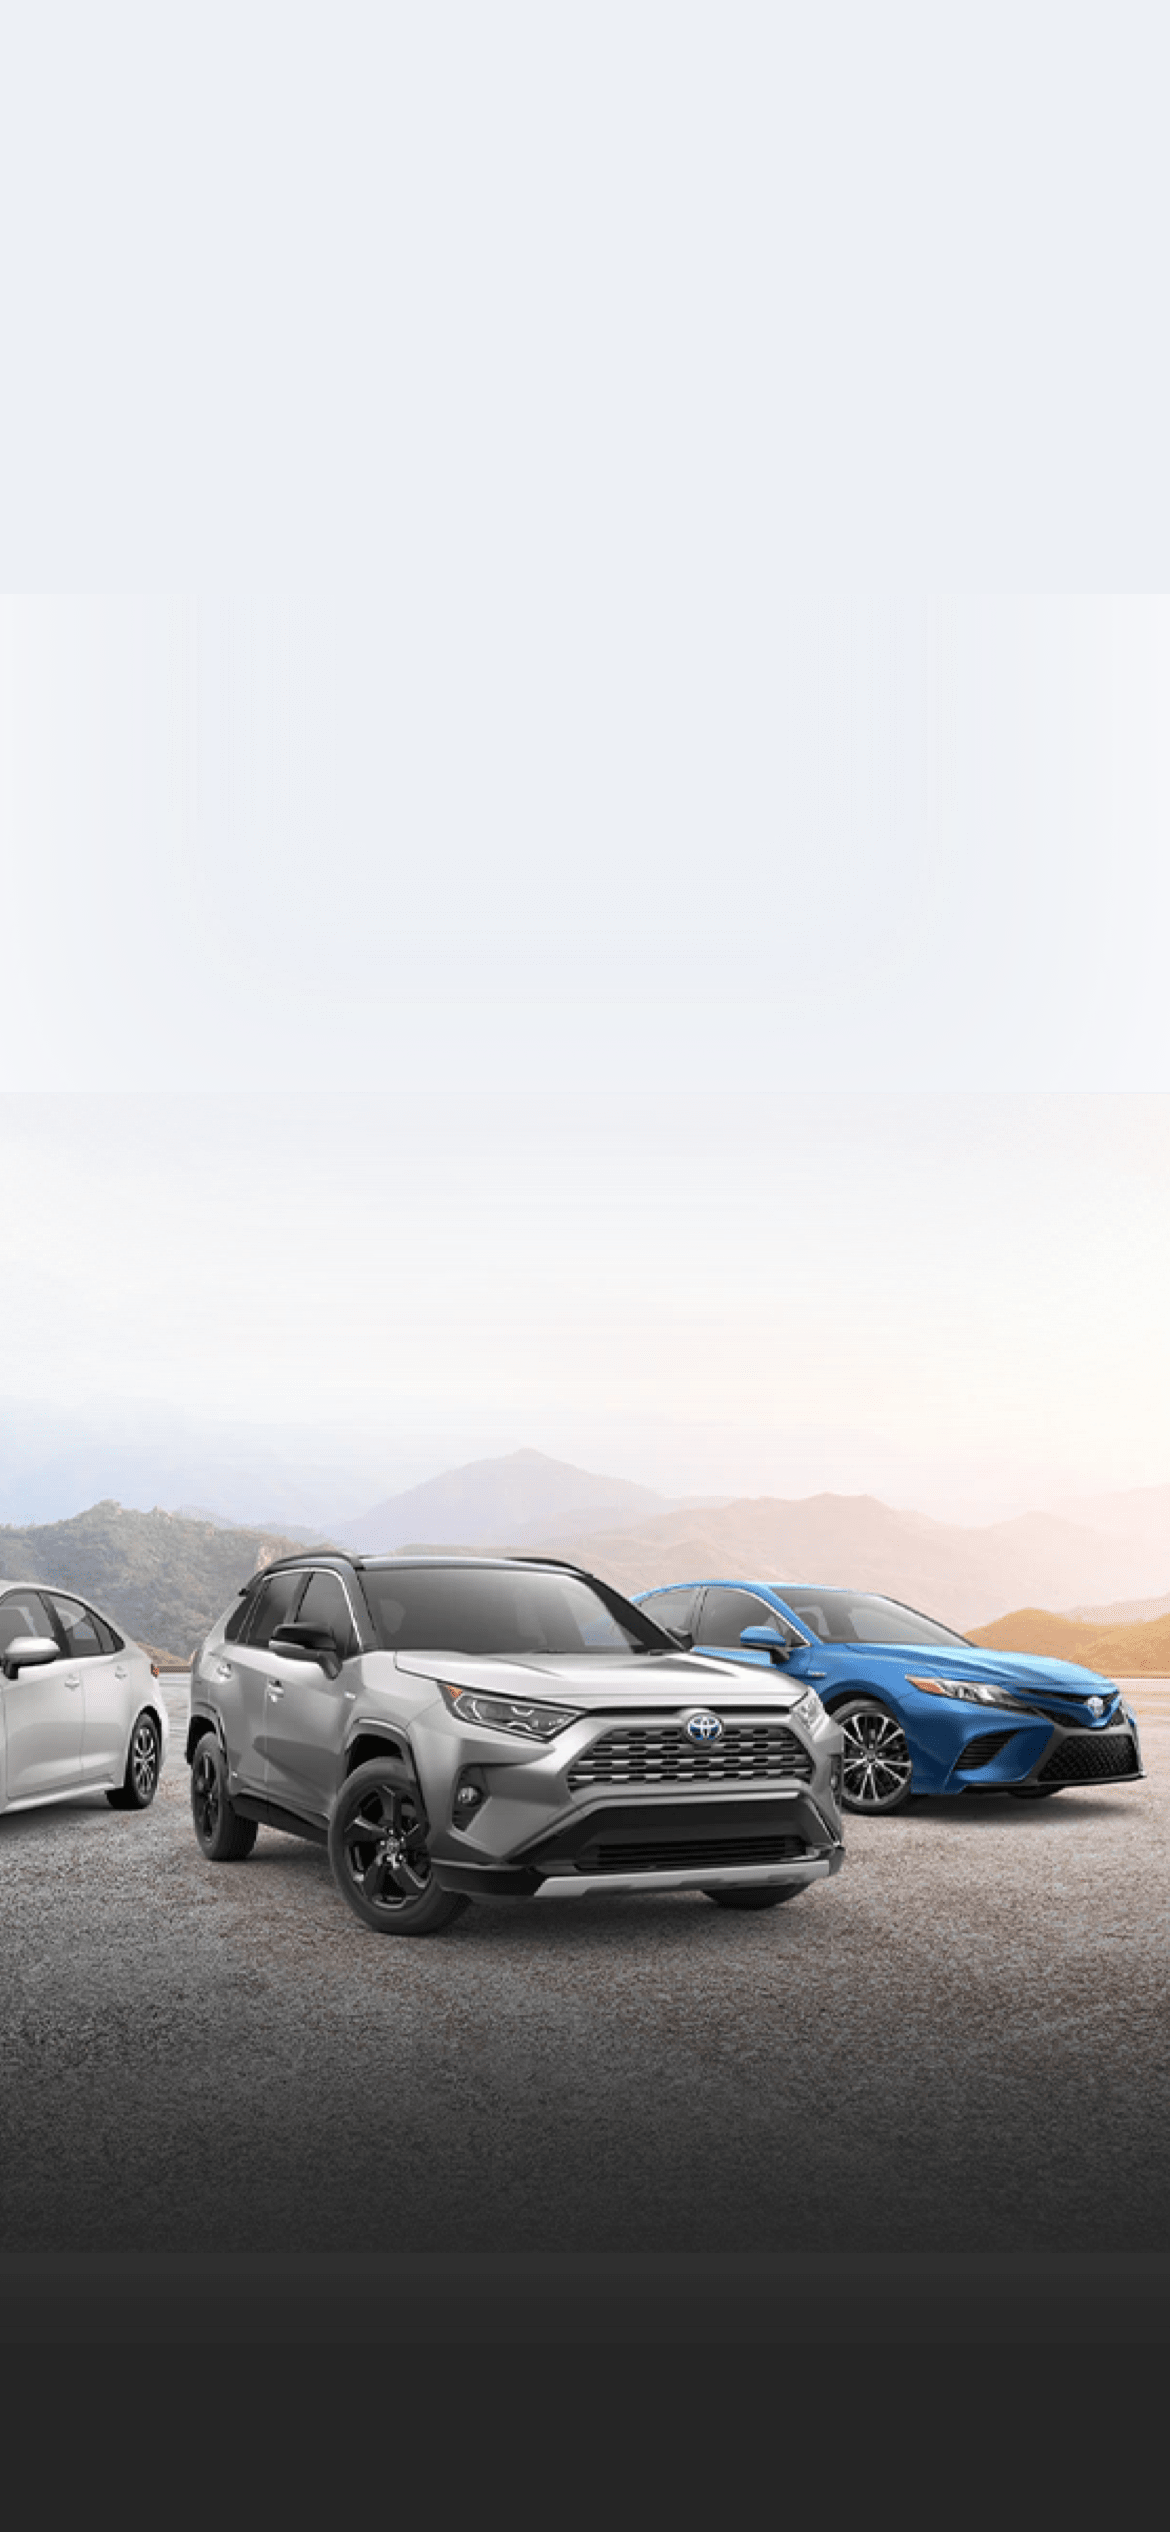 Toyota vehicle lineup in front of mountains